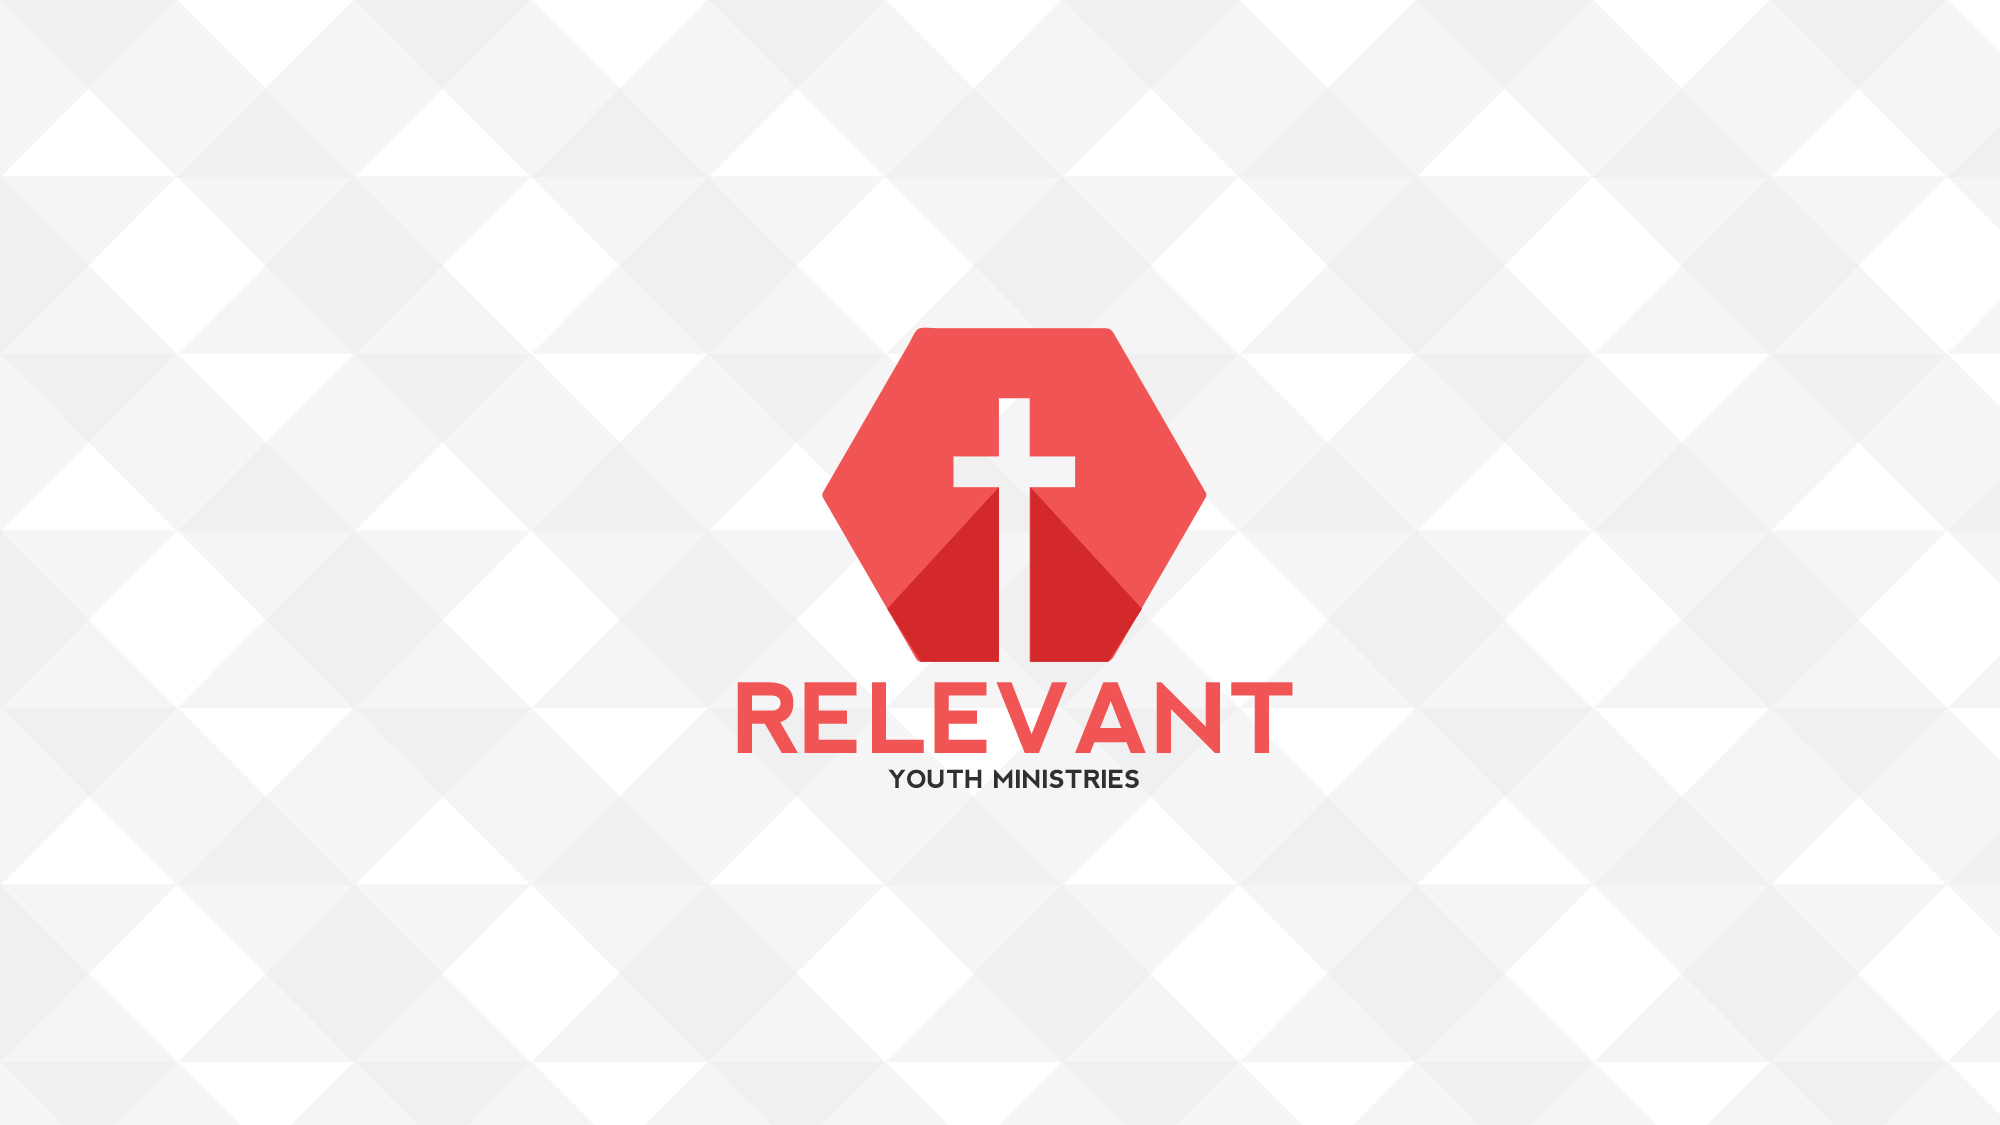 Relevant Youth Ministries